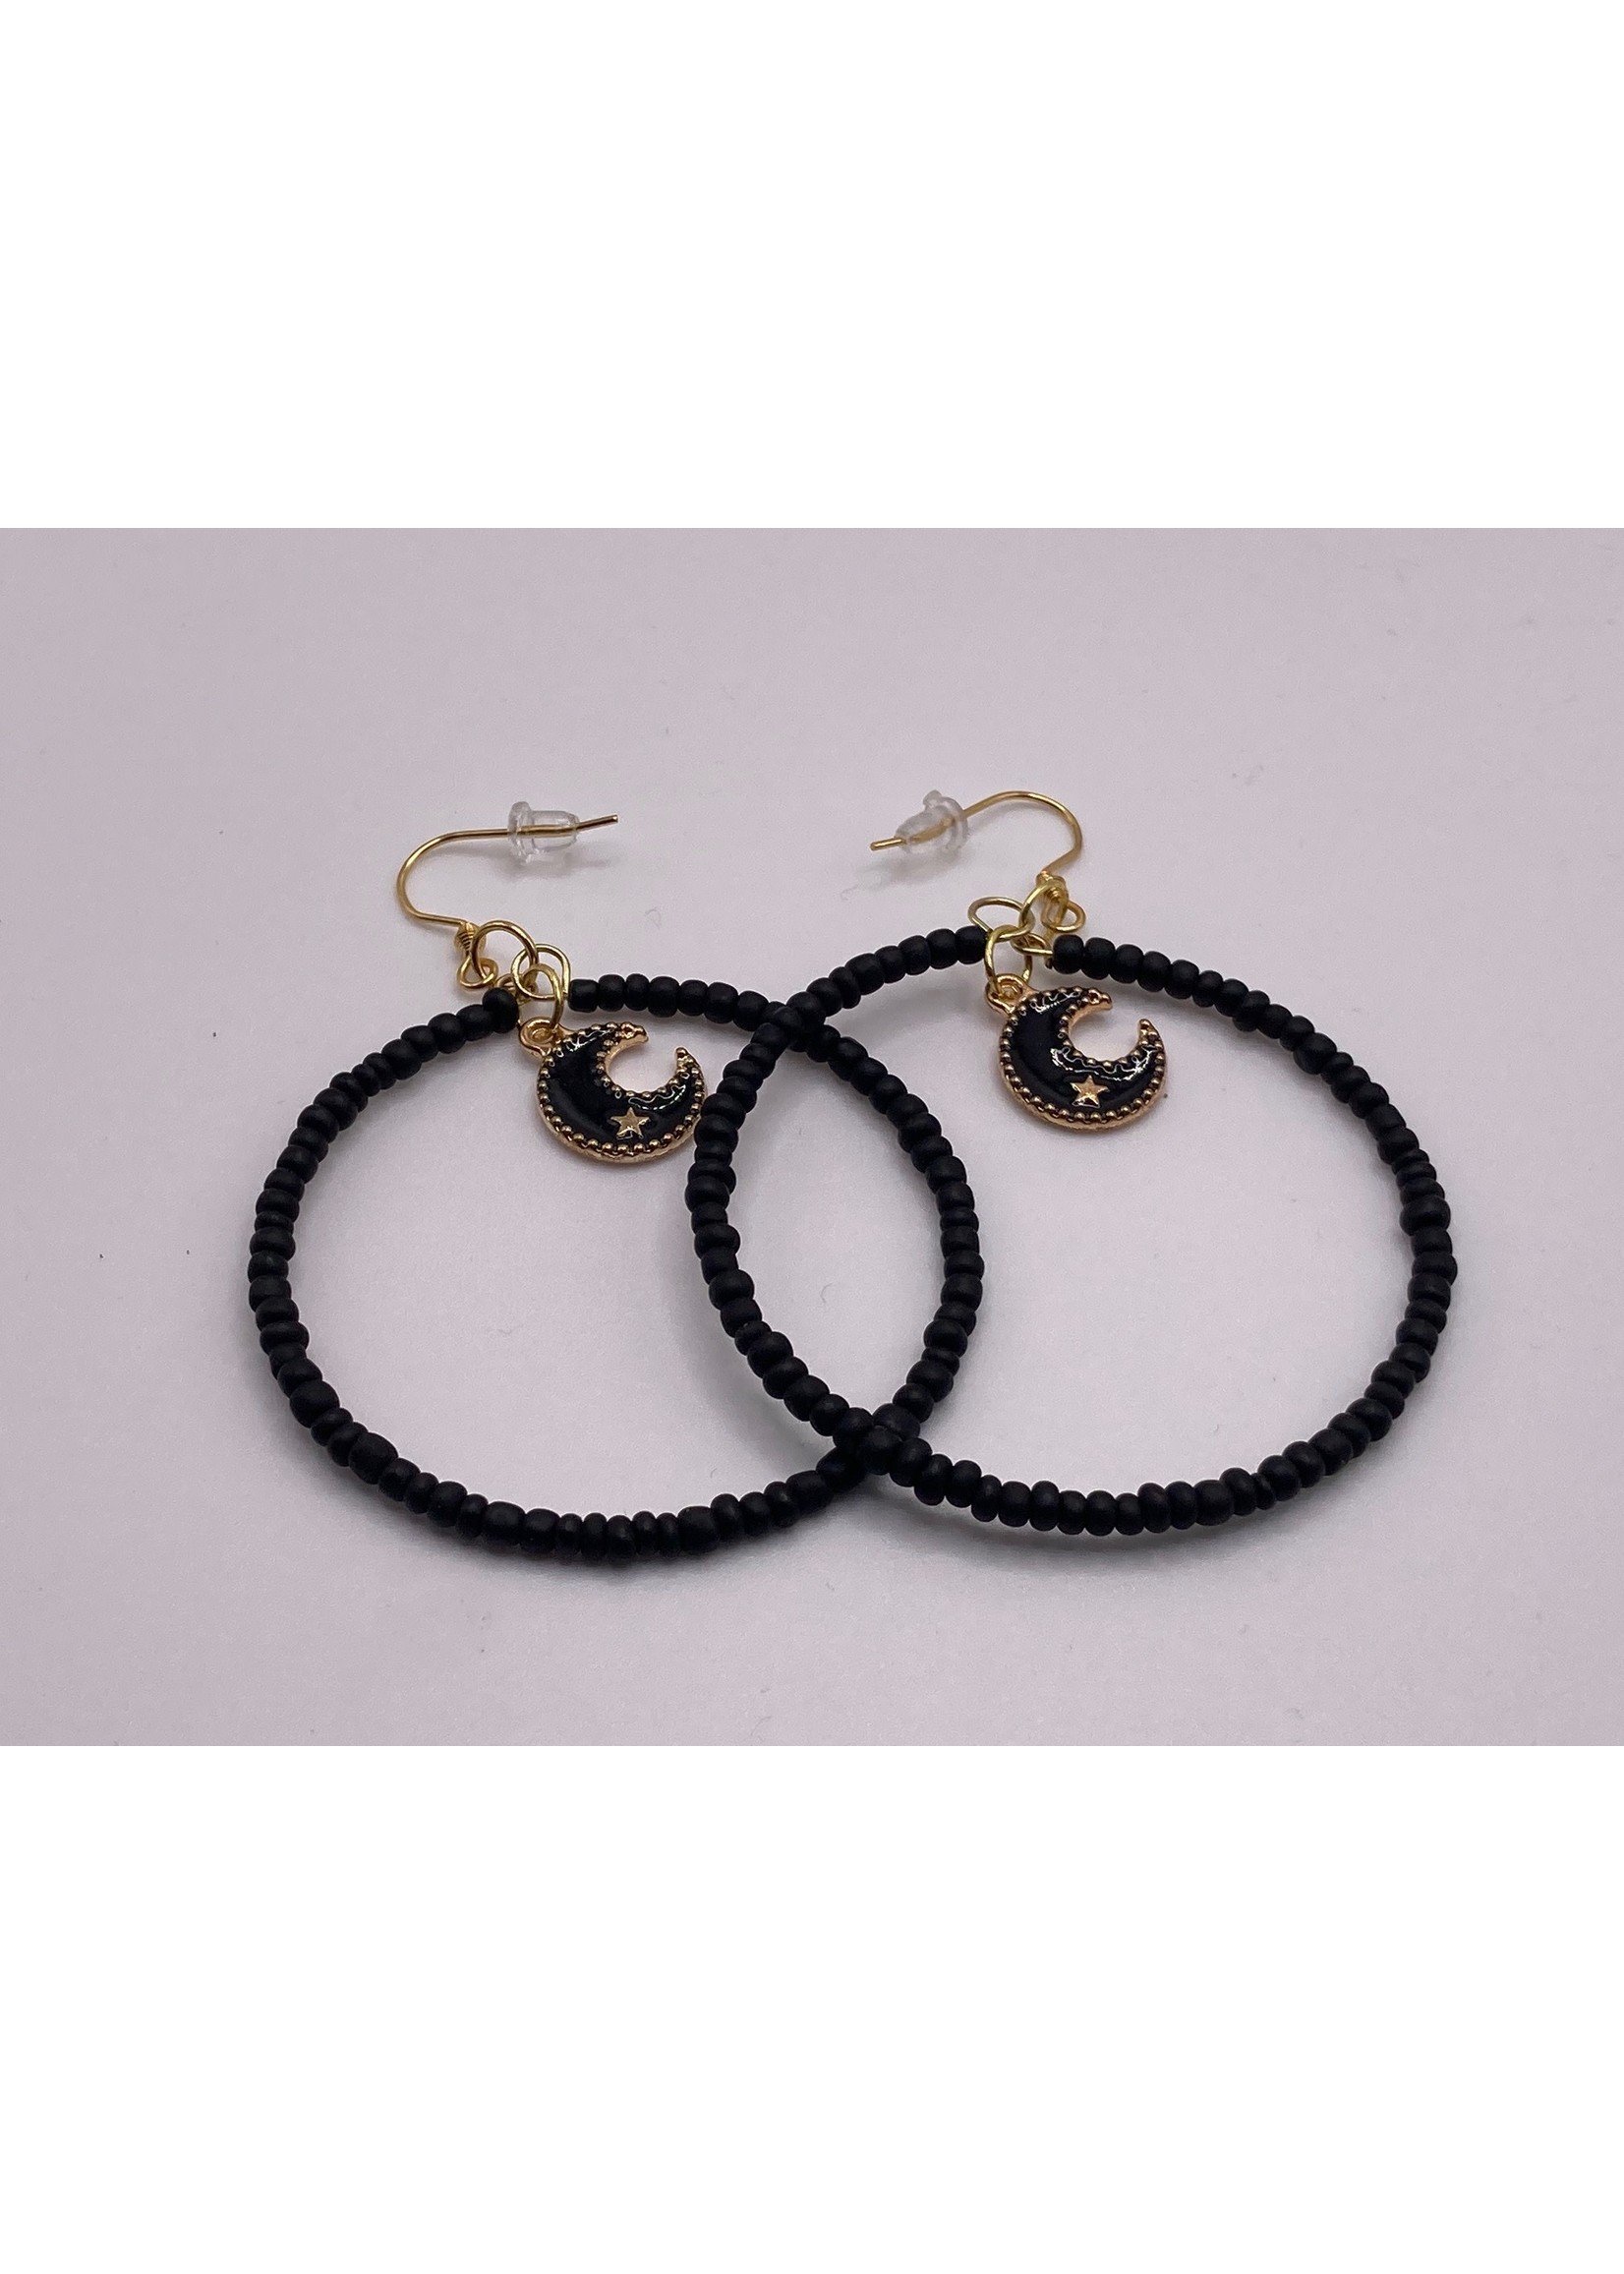 Our Twisted Dahlia Matte Black Seed Bead Hoops with Crescent Moon Charm Earrings